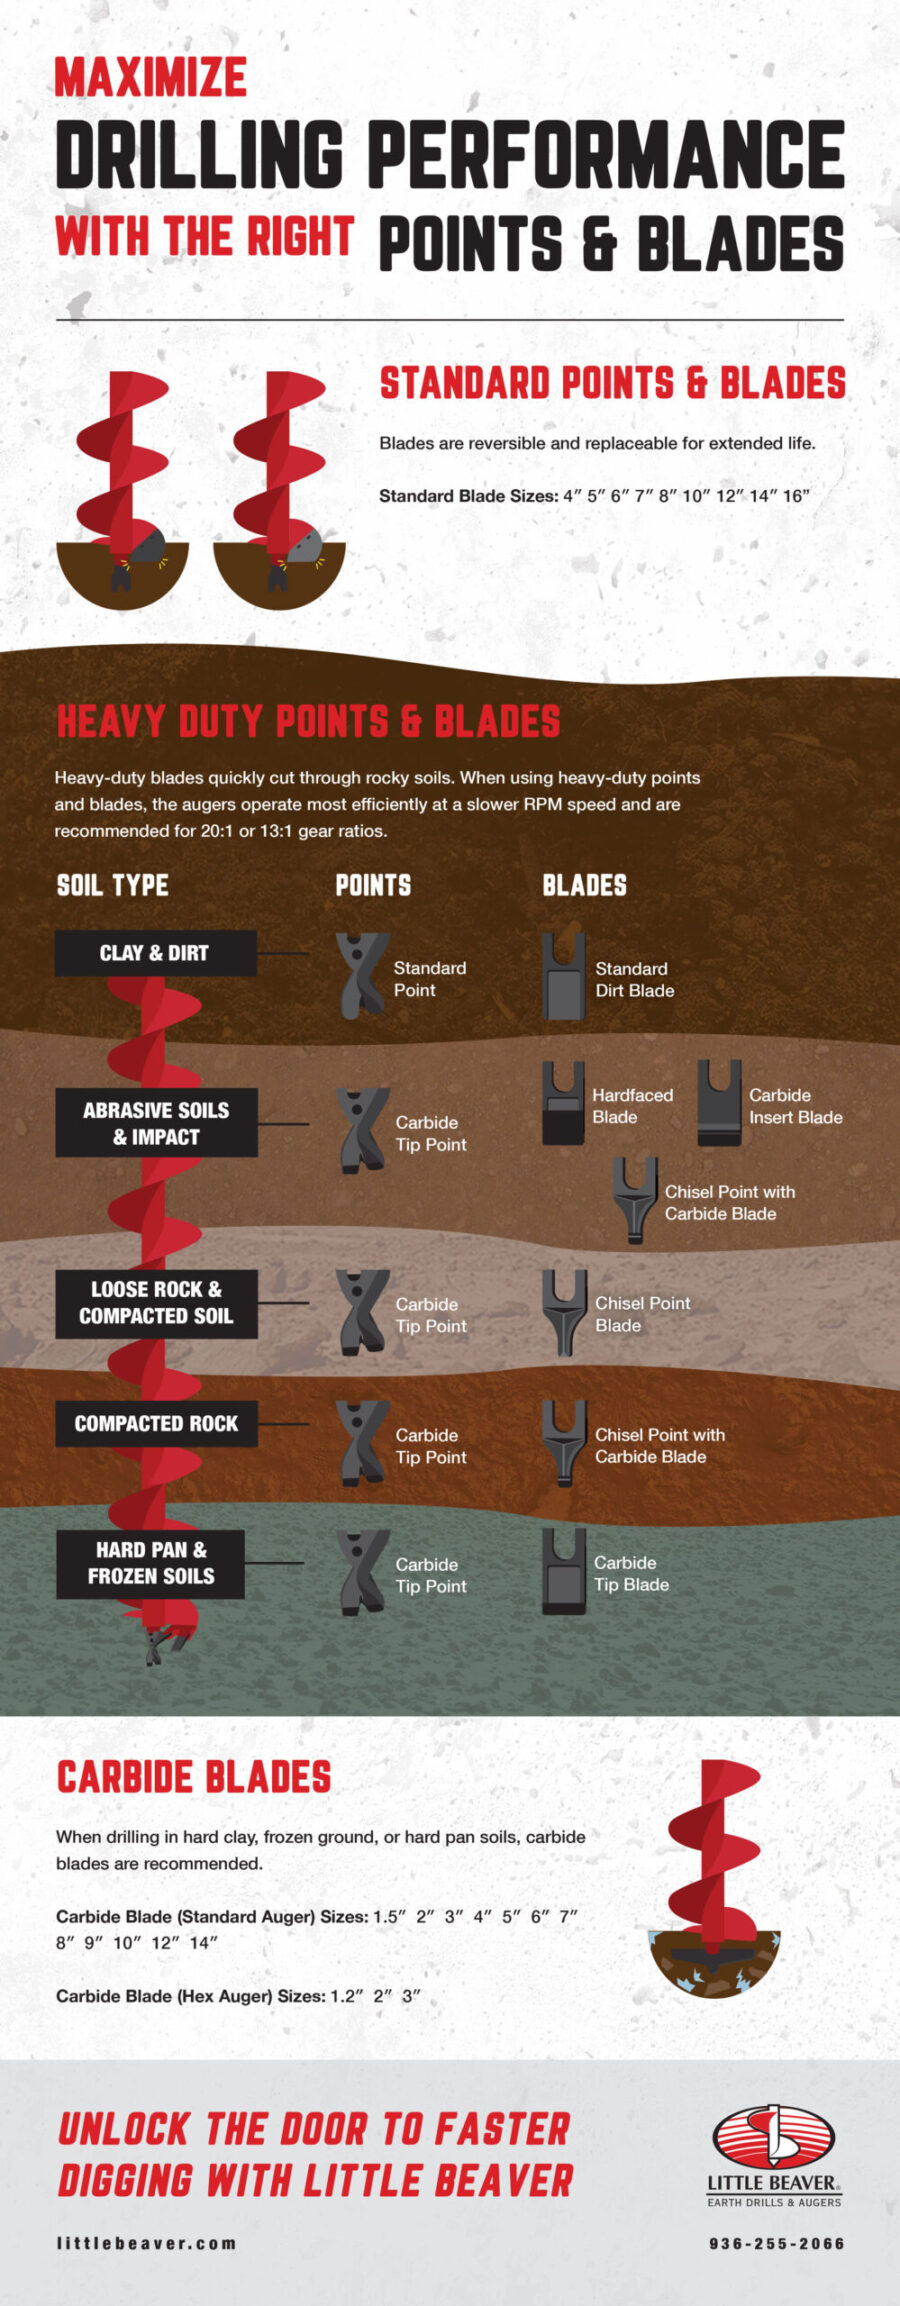 Little Beaver Points & Blades infographic